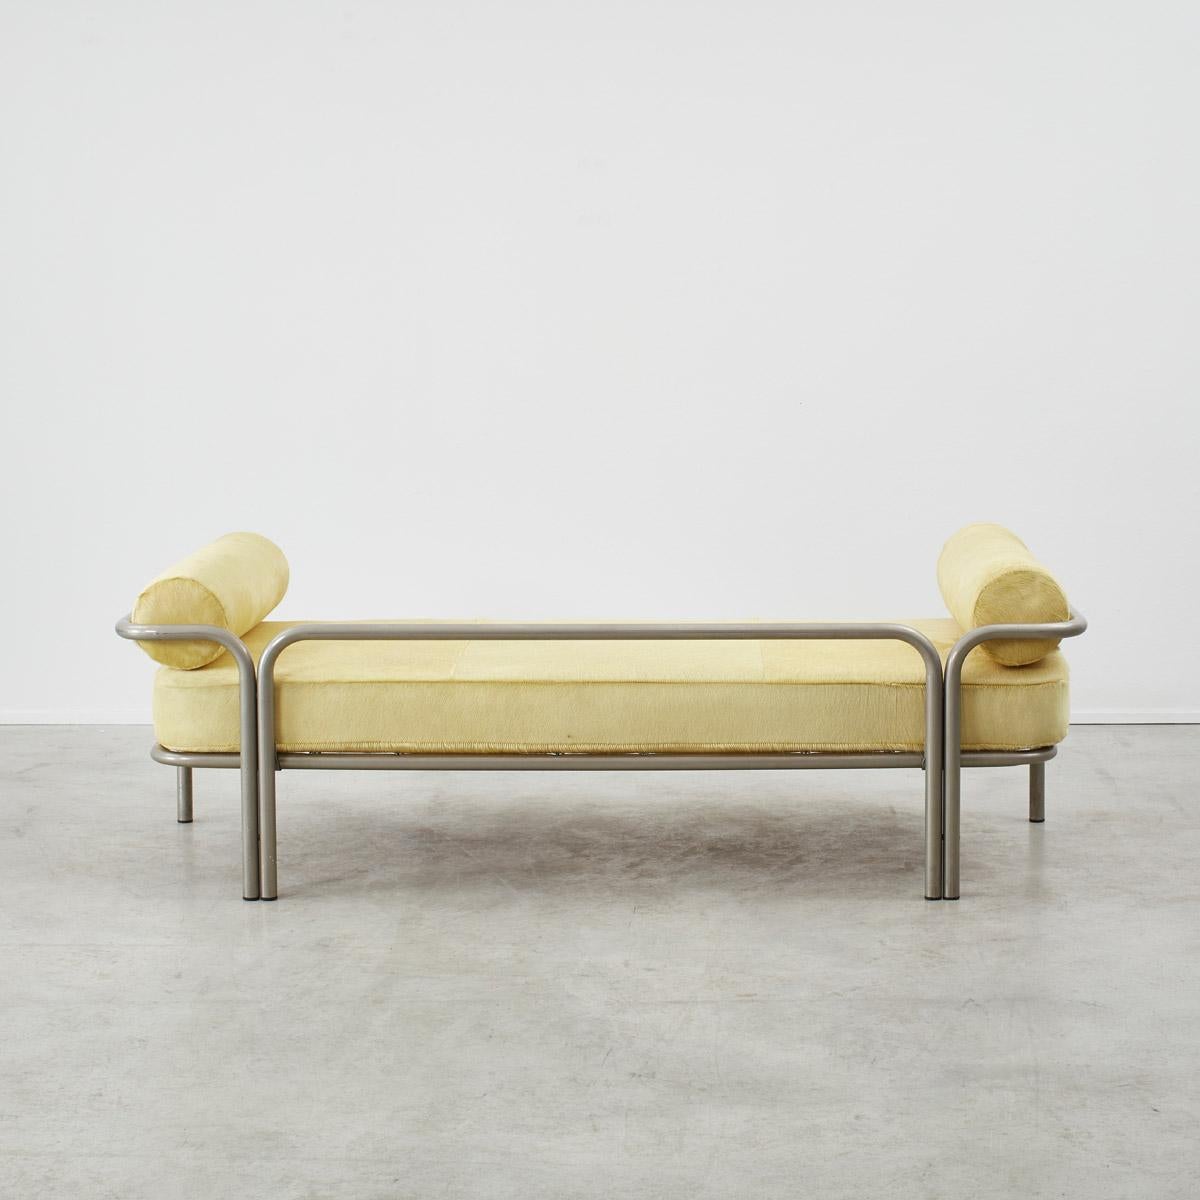 Gae Aulenti Locus Solus daybed for Poltronova, Italy 1964 For Sale 2